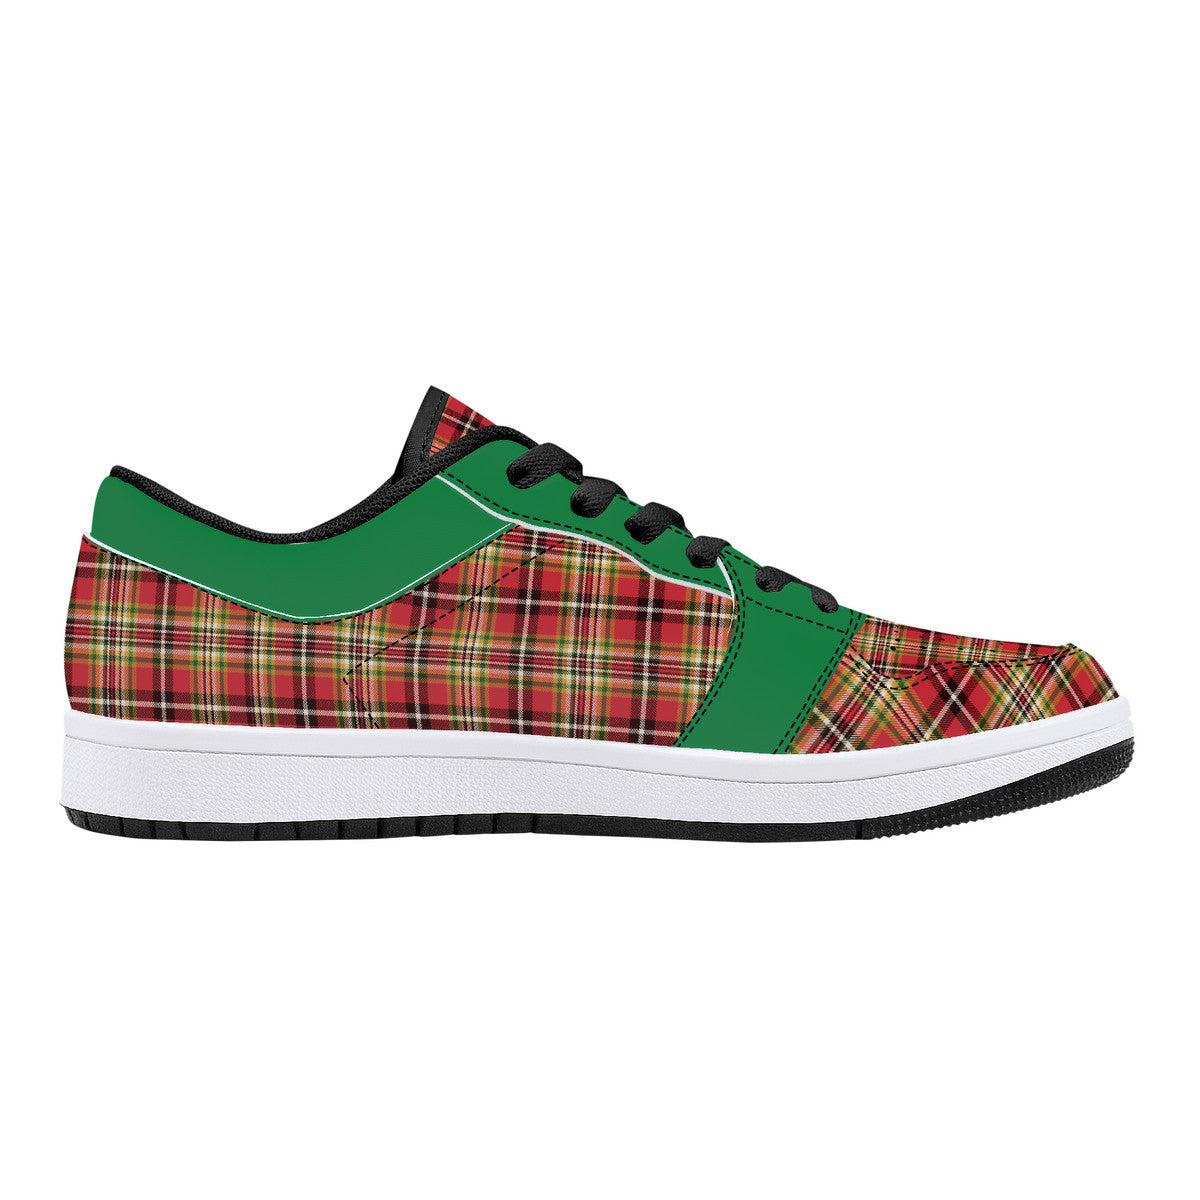 Leather Sneakers - Scottish Plaid